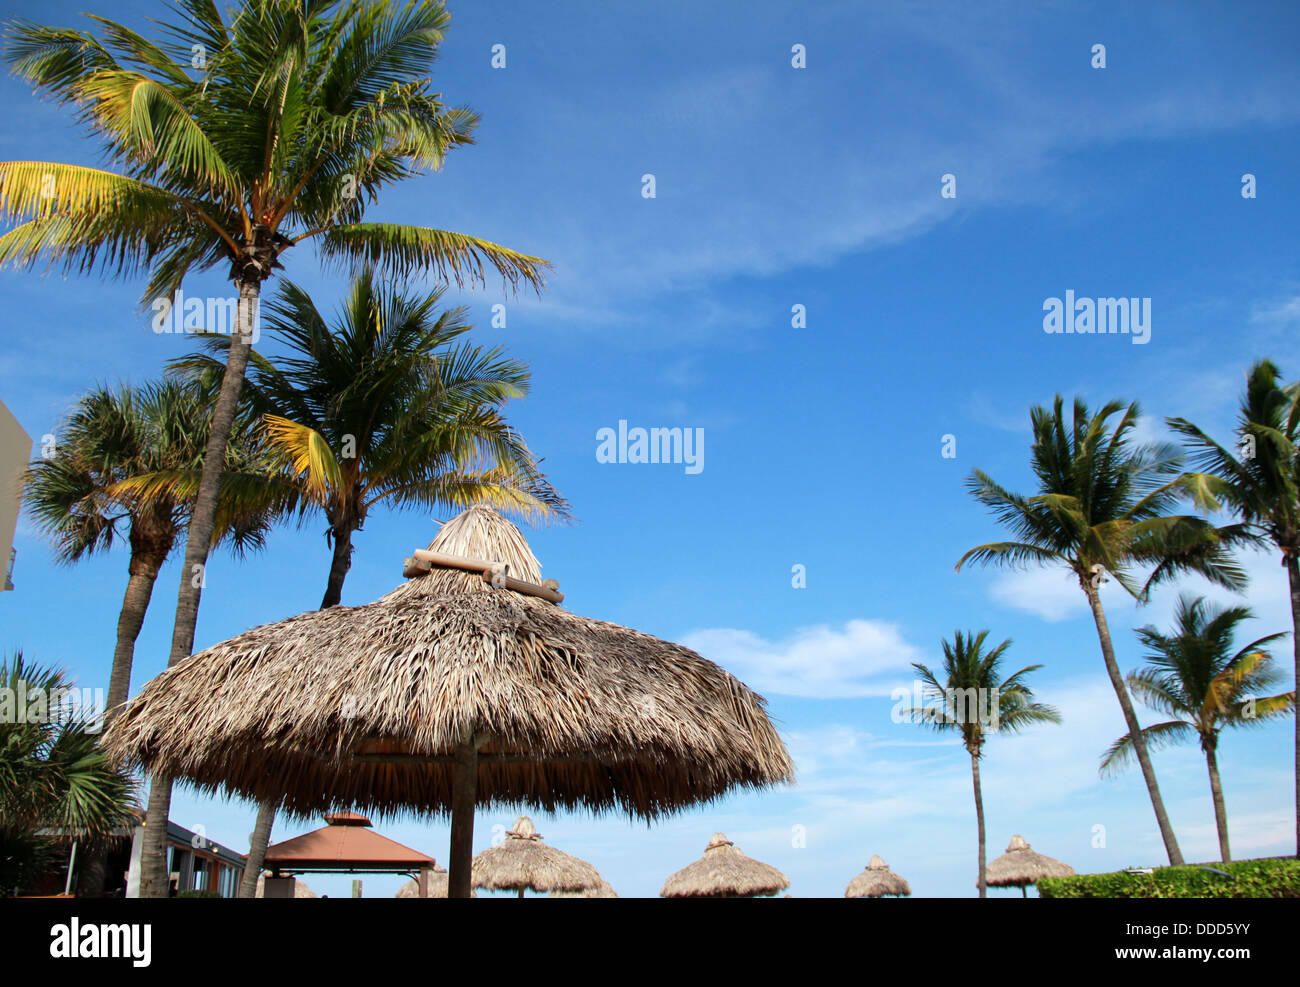 Classic blue skies and puffy clouds with several tall palm trees over Tiki umbrellas at seashore resort, where people go to relax from busy lives. Stock Photo